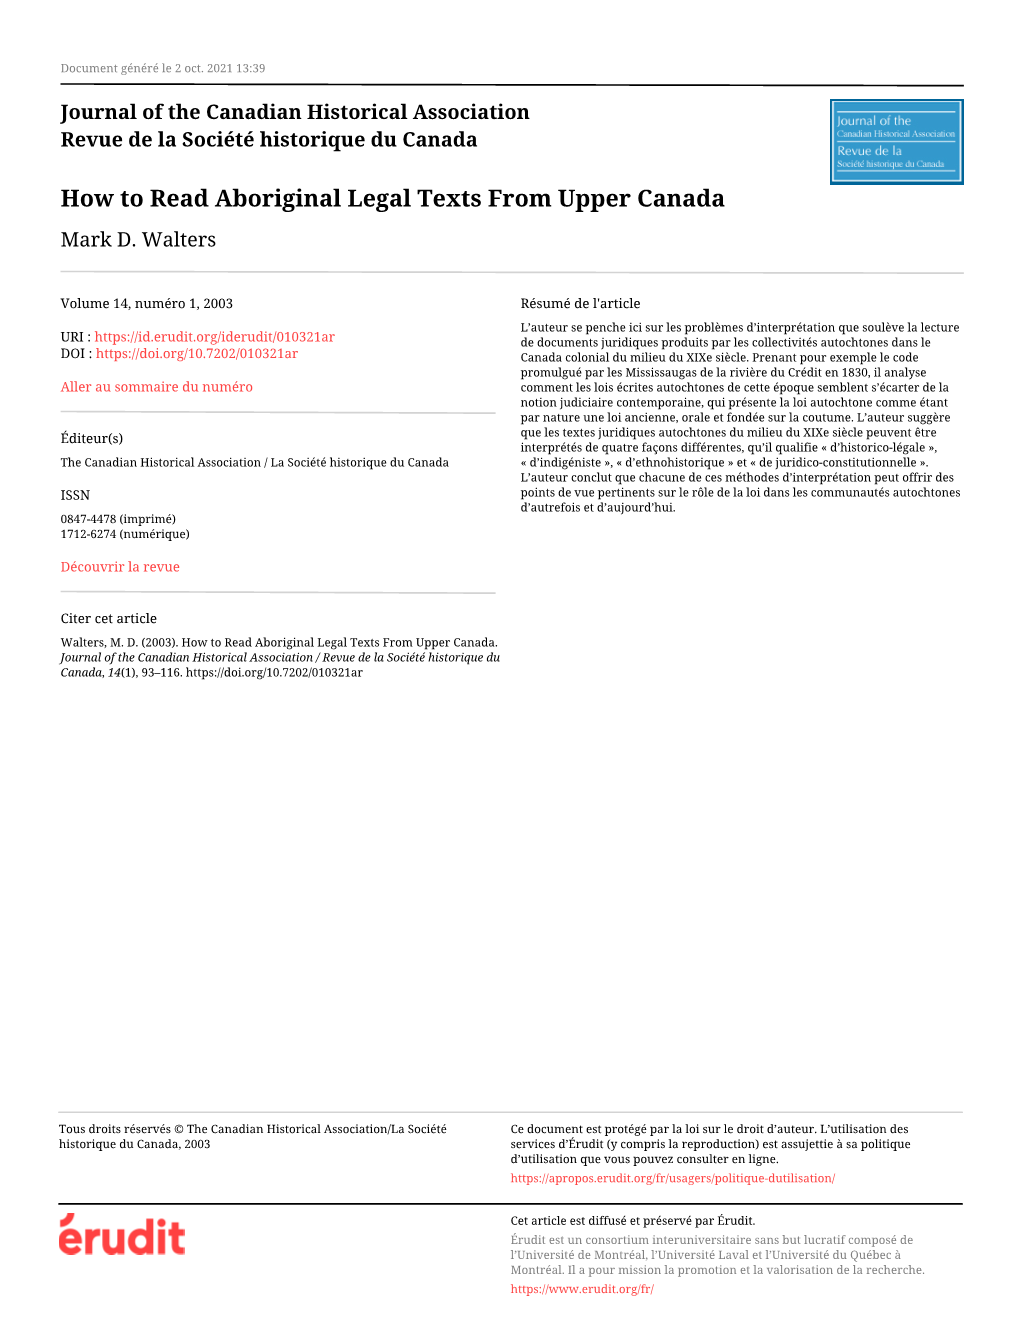 How to Read Aboriginal Legal Texts from Upper Canada Mark D